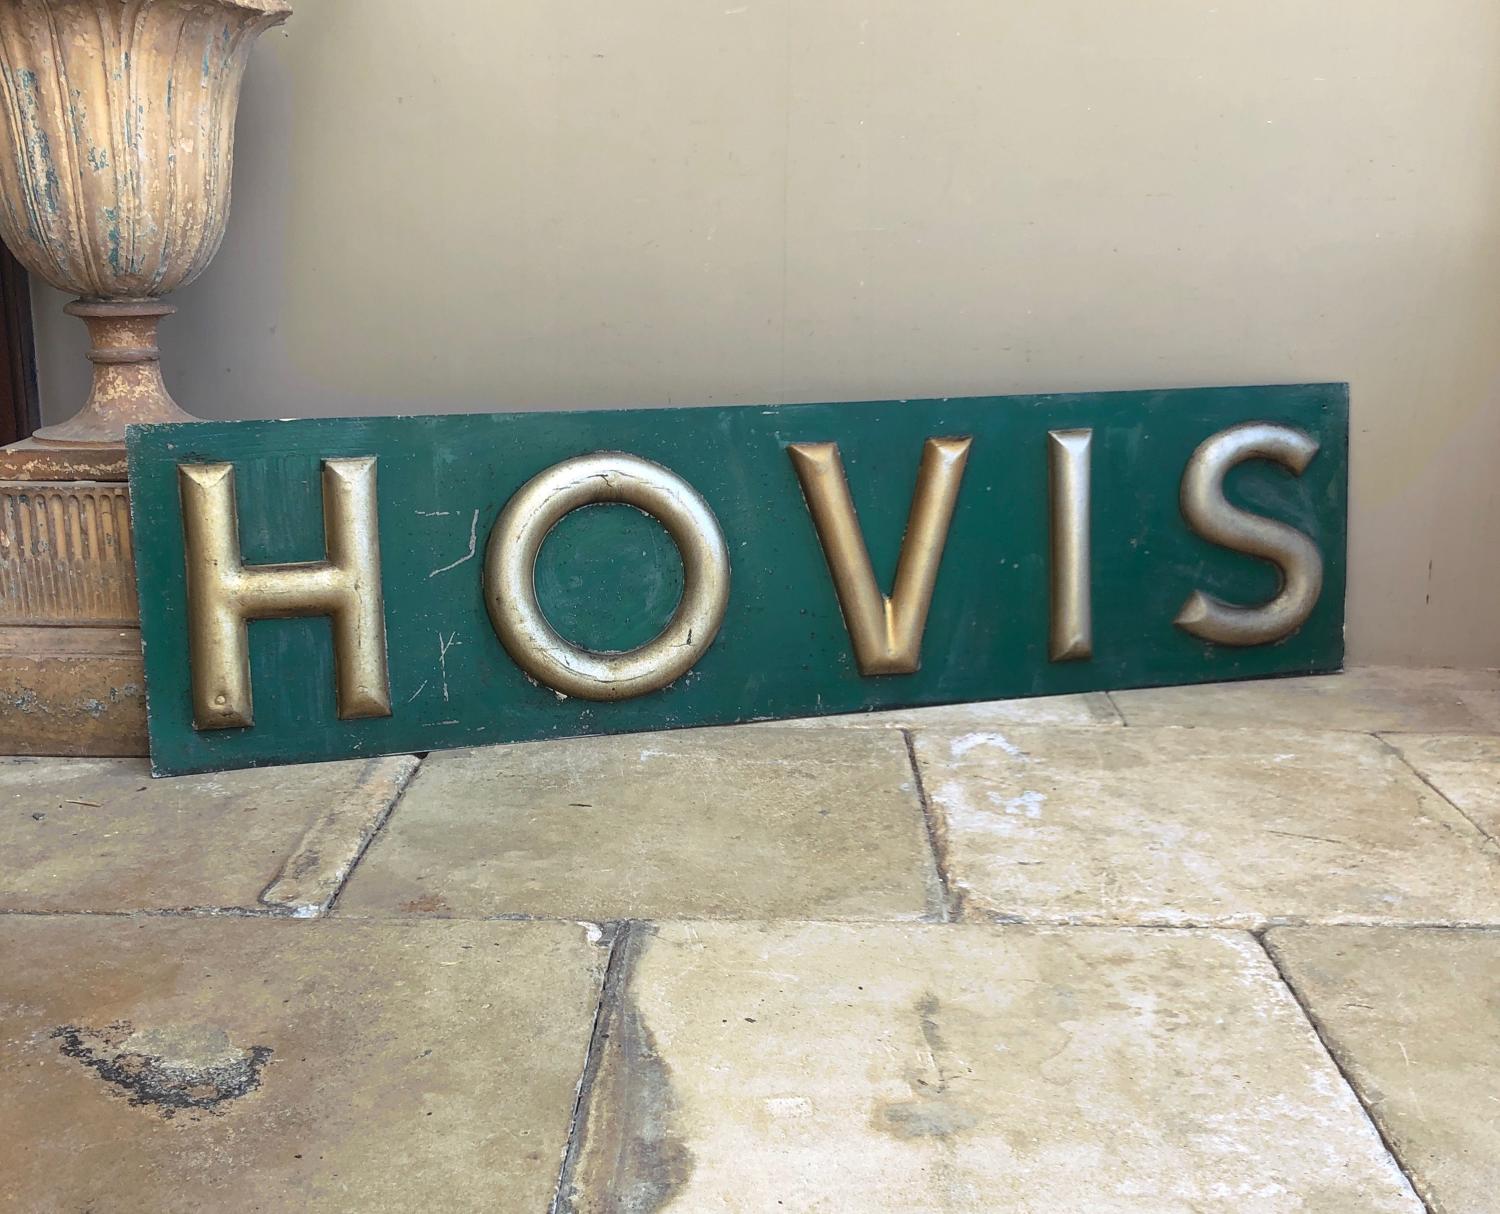 Early 20th Century Bakers Hovis Sign - Completely Original